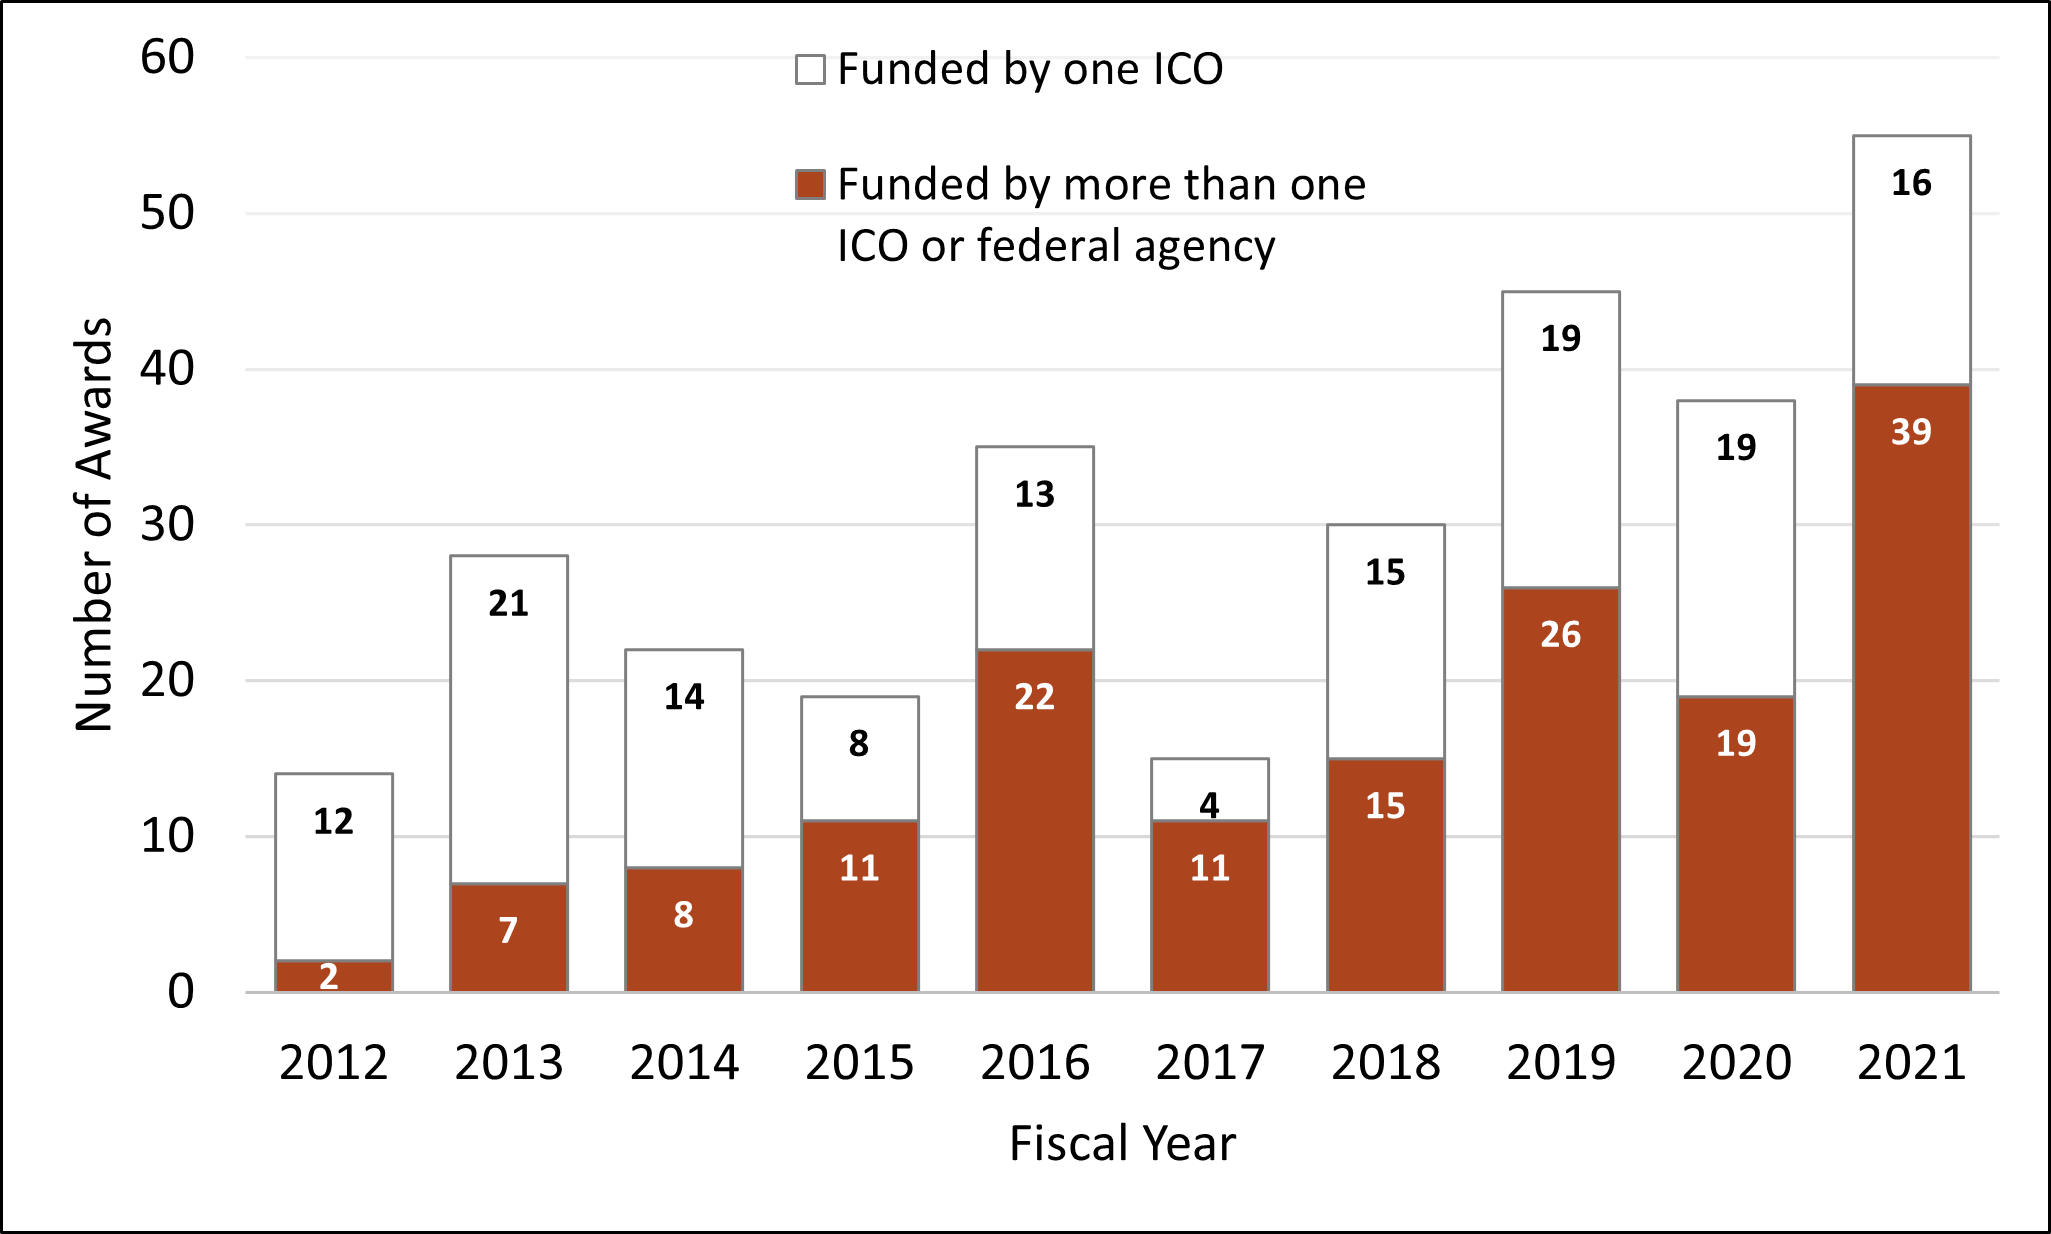 "Stacked bar chart. Number of awards over the 2012 to 2021 fiscal years. Number of awards are from 0 to 60. Each year has figures for funding from one ICO and funding from more than one ICO or federal agency.  The bars show the following. 2012 had 12 awards funded by one ICO and 2 awards funded by more than one ICO or federal agency, 2013 had 21 and 7, 2014 had 14 and 8, 2015 had 8 and 11, 2016 had 13 and 22, 2017 had 4 and 11, 2018 had 15 and 15, 2019 had 19 and 26, 2020 had 19 and 19, and 2021 had 16 and 39. "